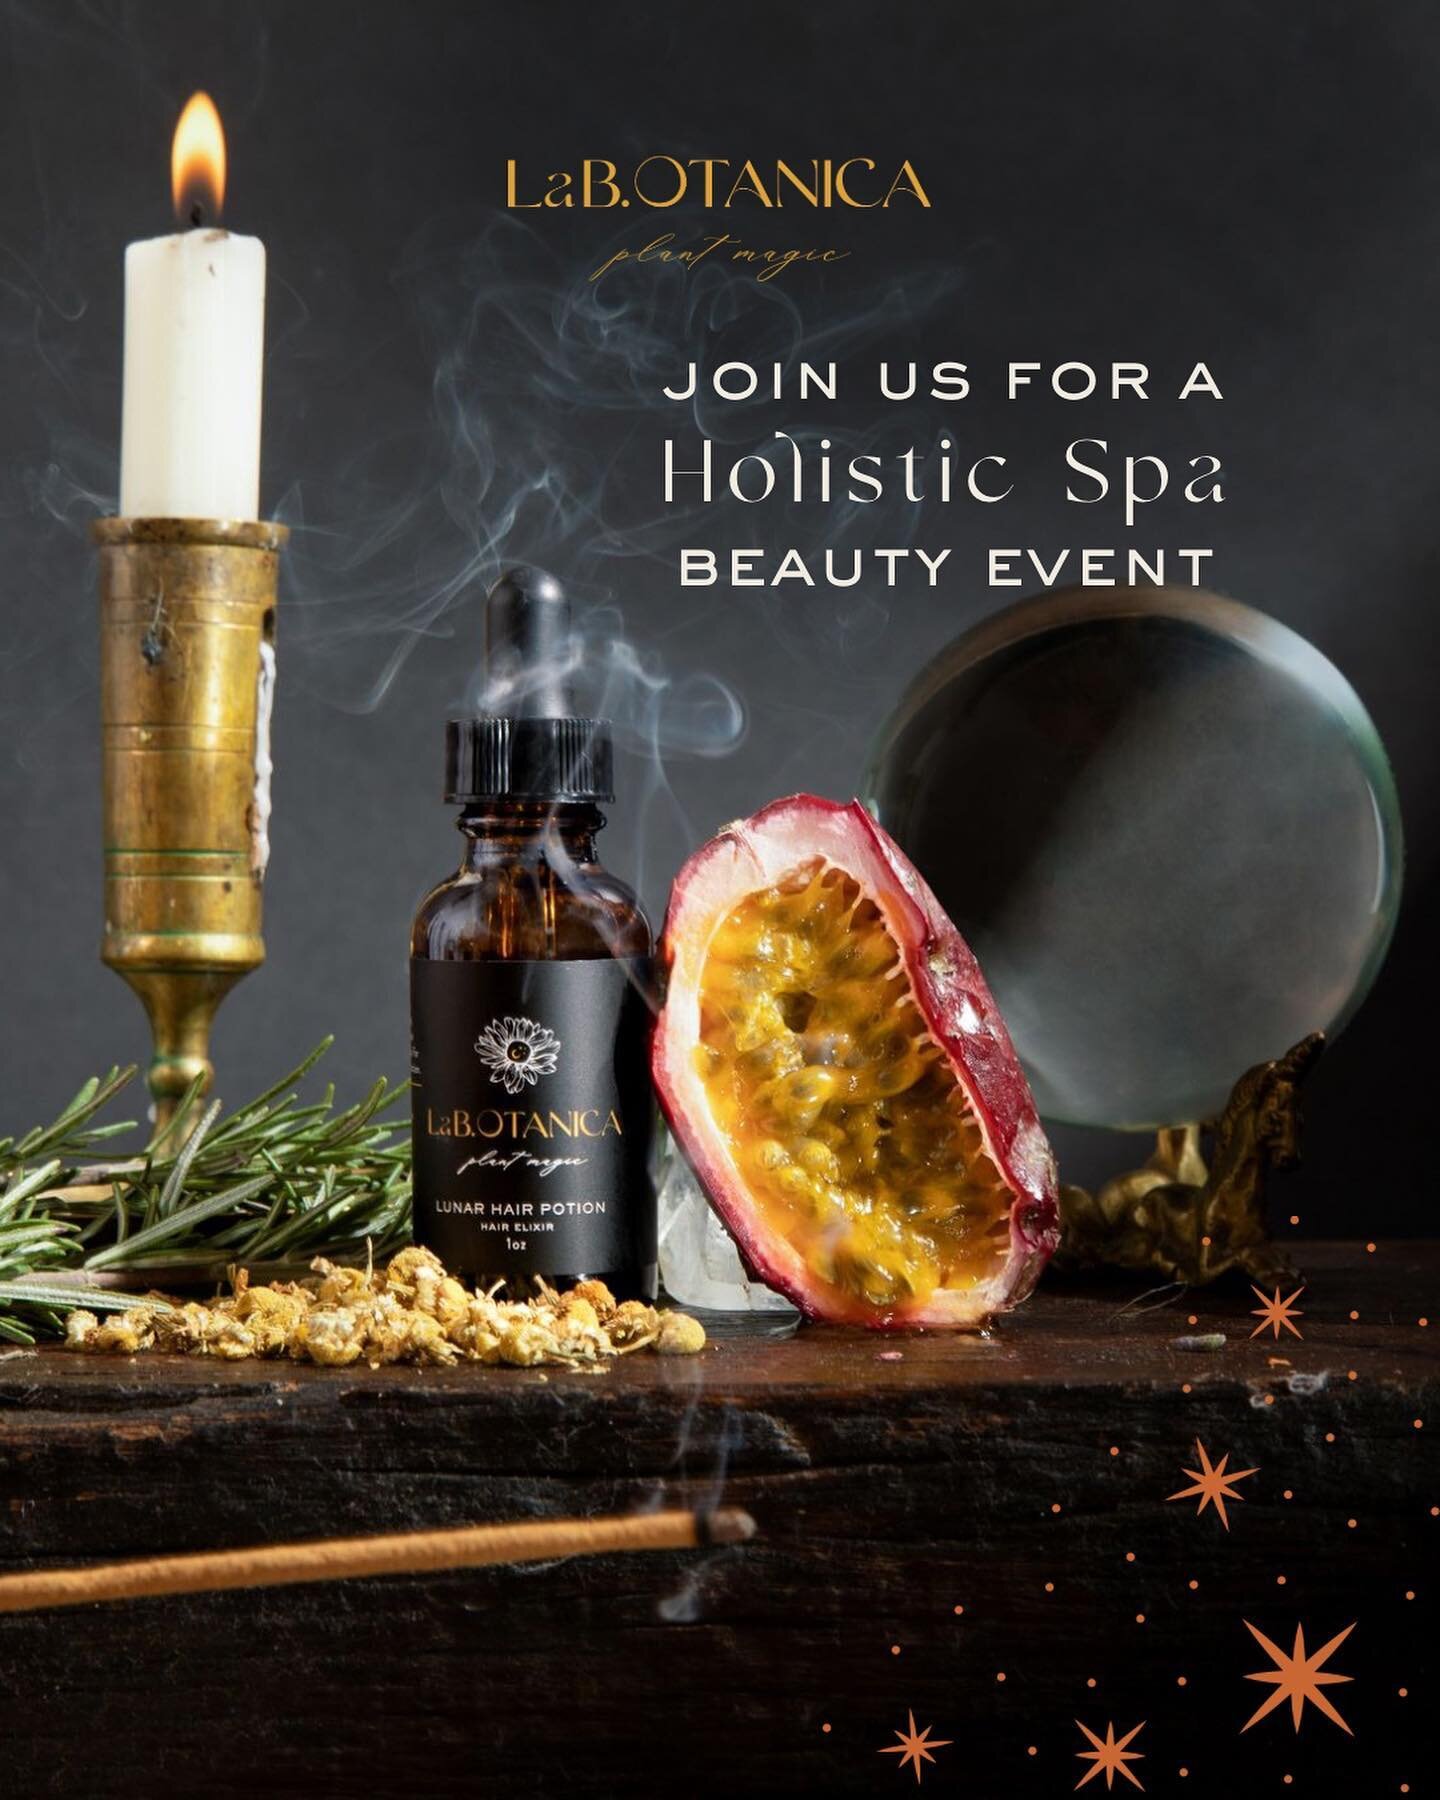 This weekend ✨Let's us take you on a  beauty journey from learning about your skin's love language to skincare herb mixology to a holistic guide DIY spa experience using LAB.BOTANICA Plant Magic skincare, herbs, and raw beauty ingredients. During the